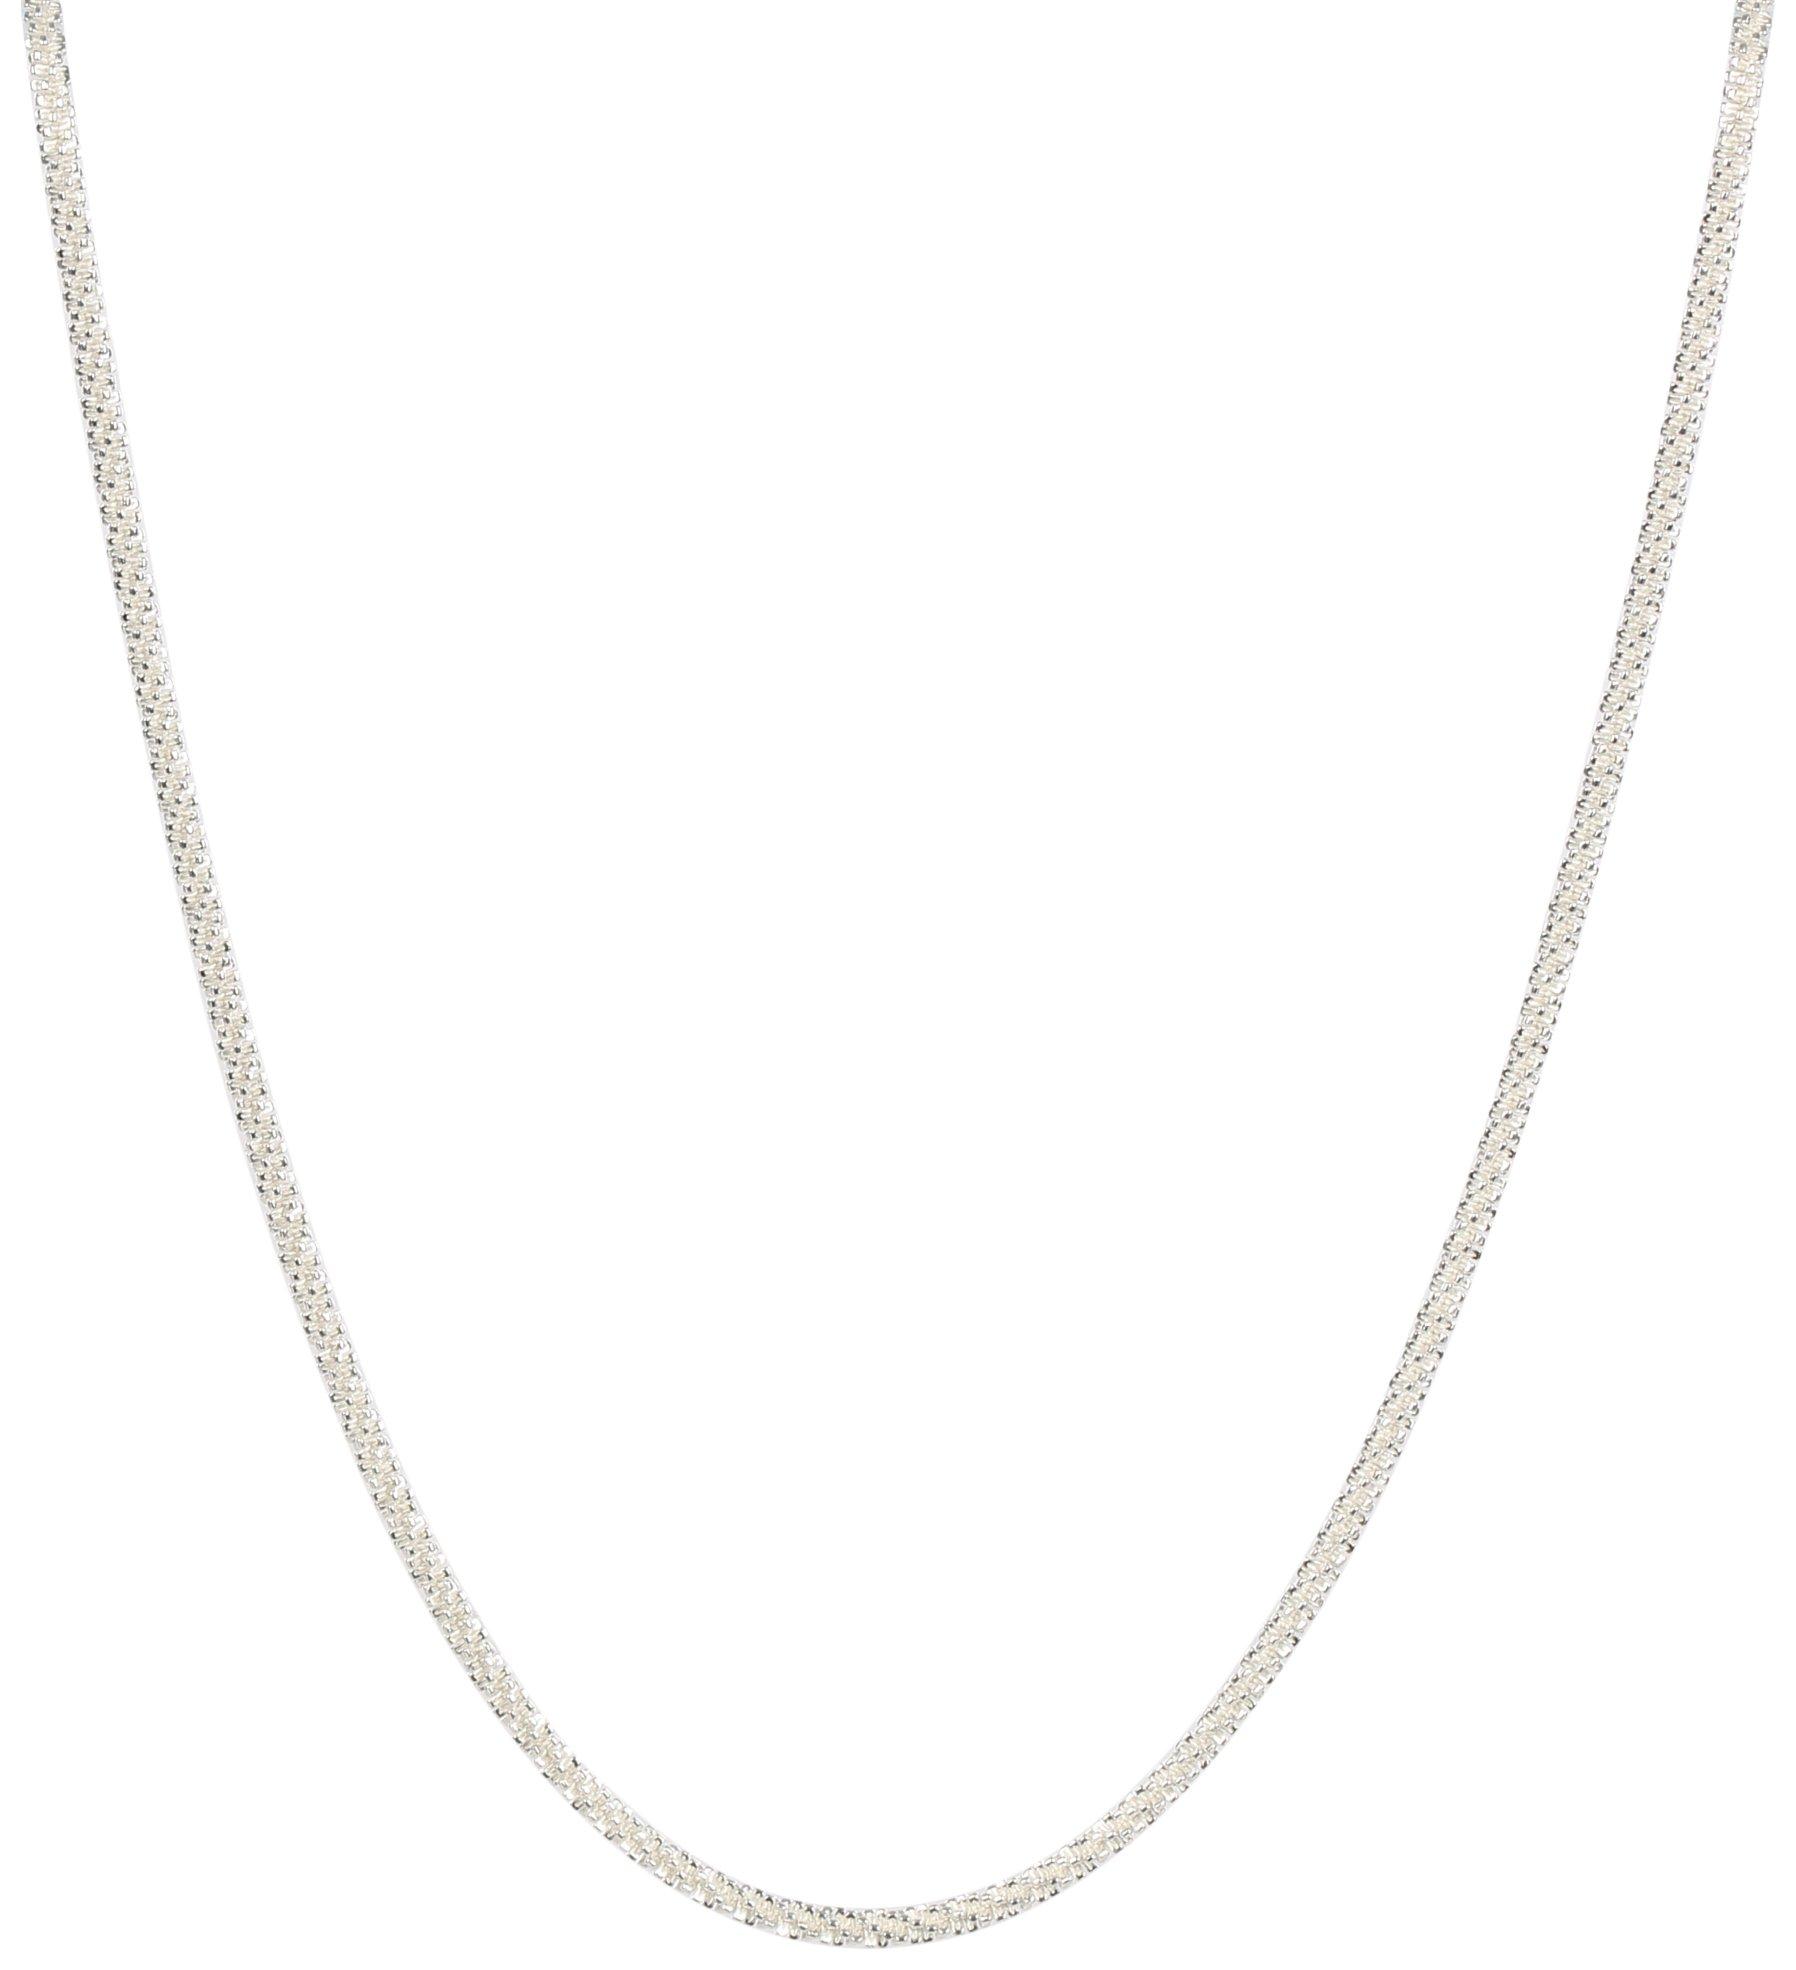 Piper & Taylor 18 In. Fancy Rolo Chain Necklace